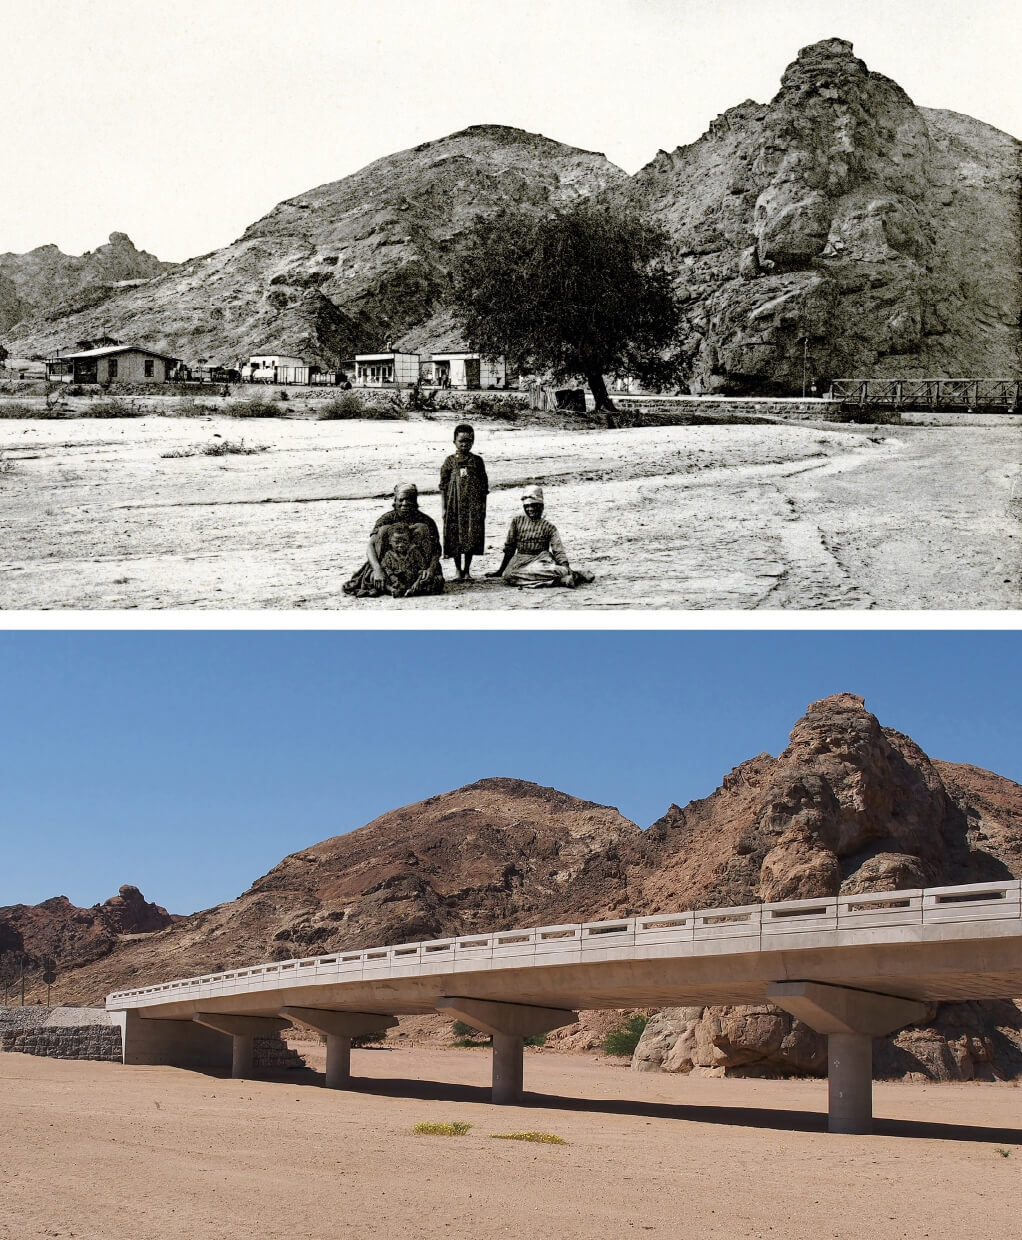 Repeat photographs of  the Khan River crossing in the Namib Desert.